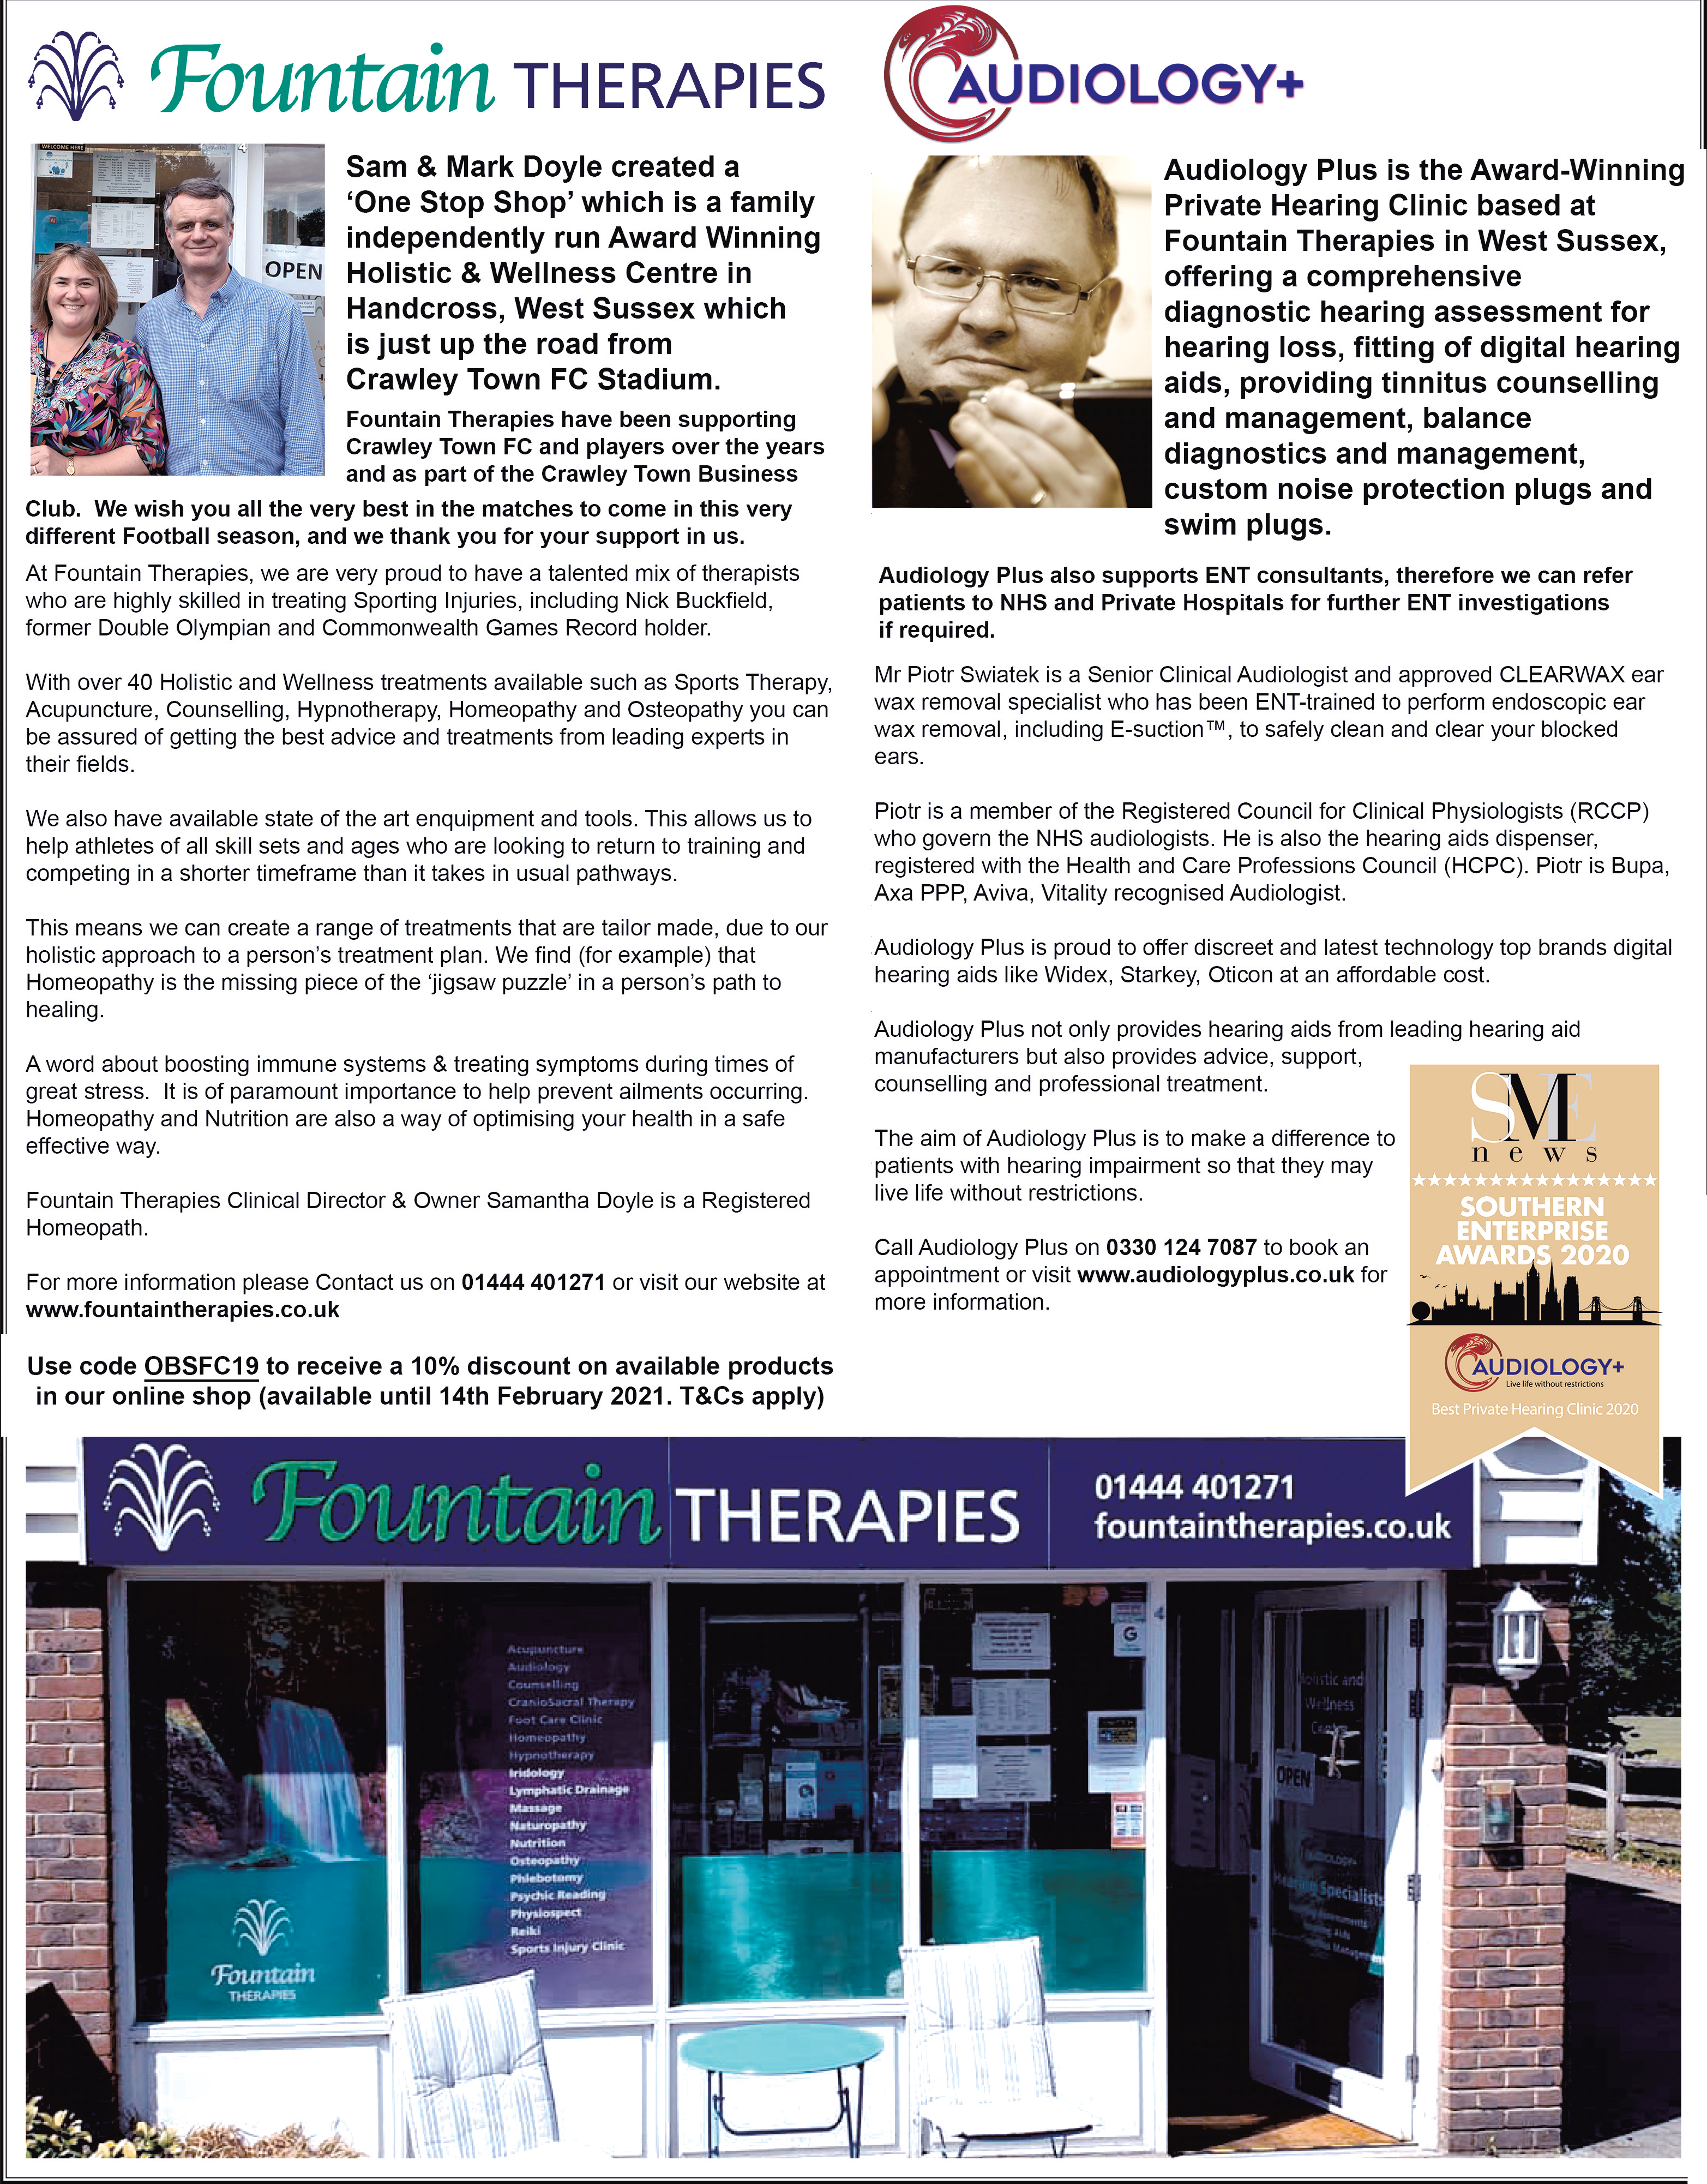 Fountain Therapies Audiology Services